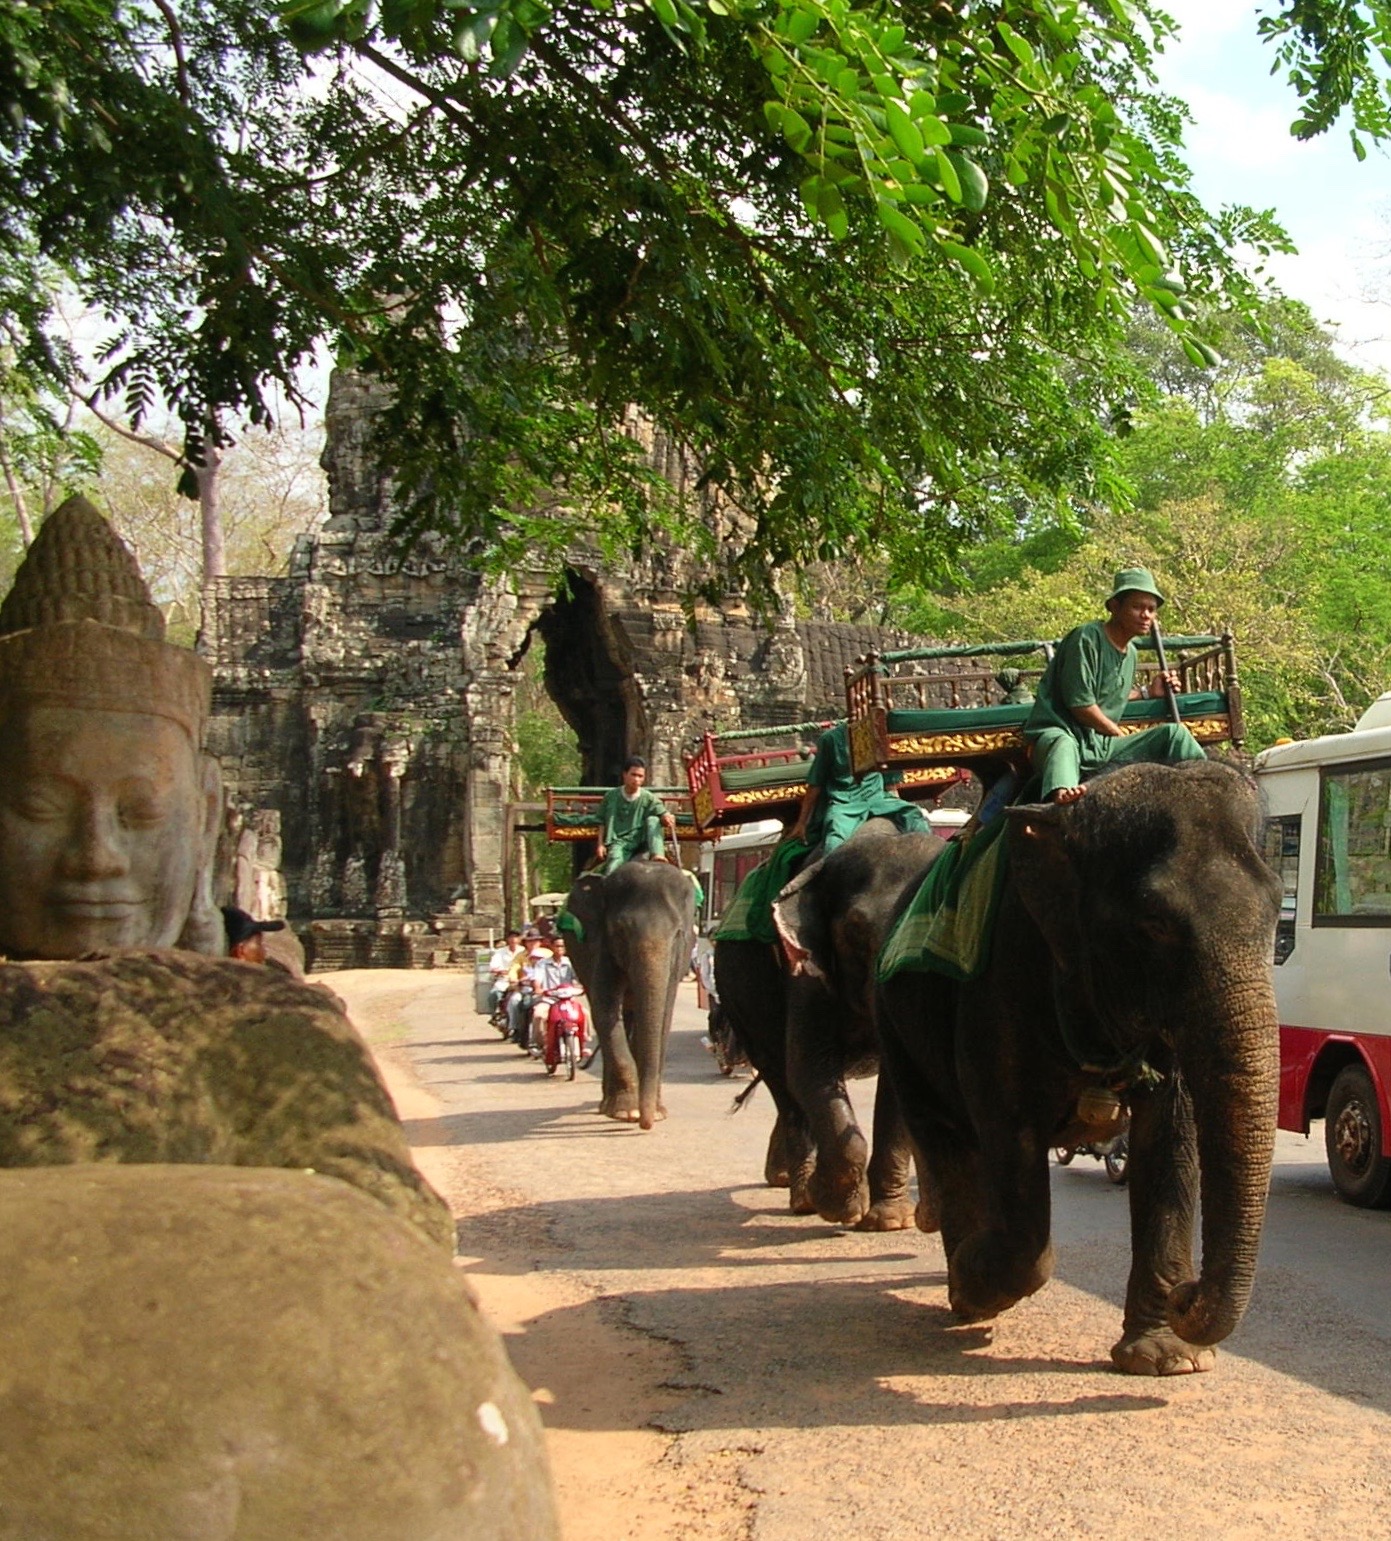 Smiling Buddahs and an elephant rush hour at Angkor Wat. Photos by Marla Norman.